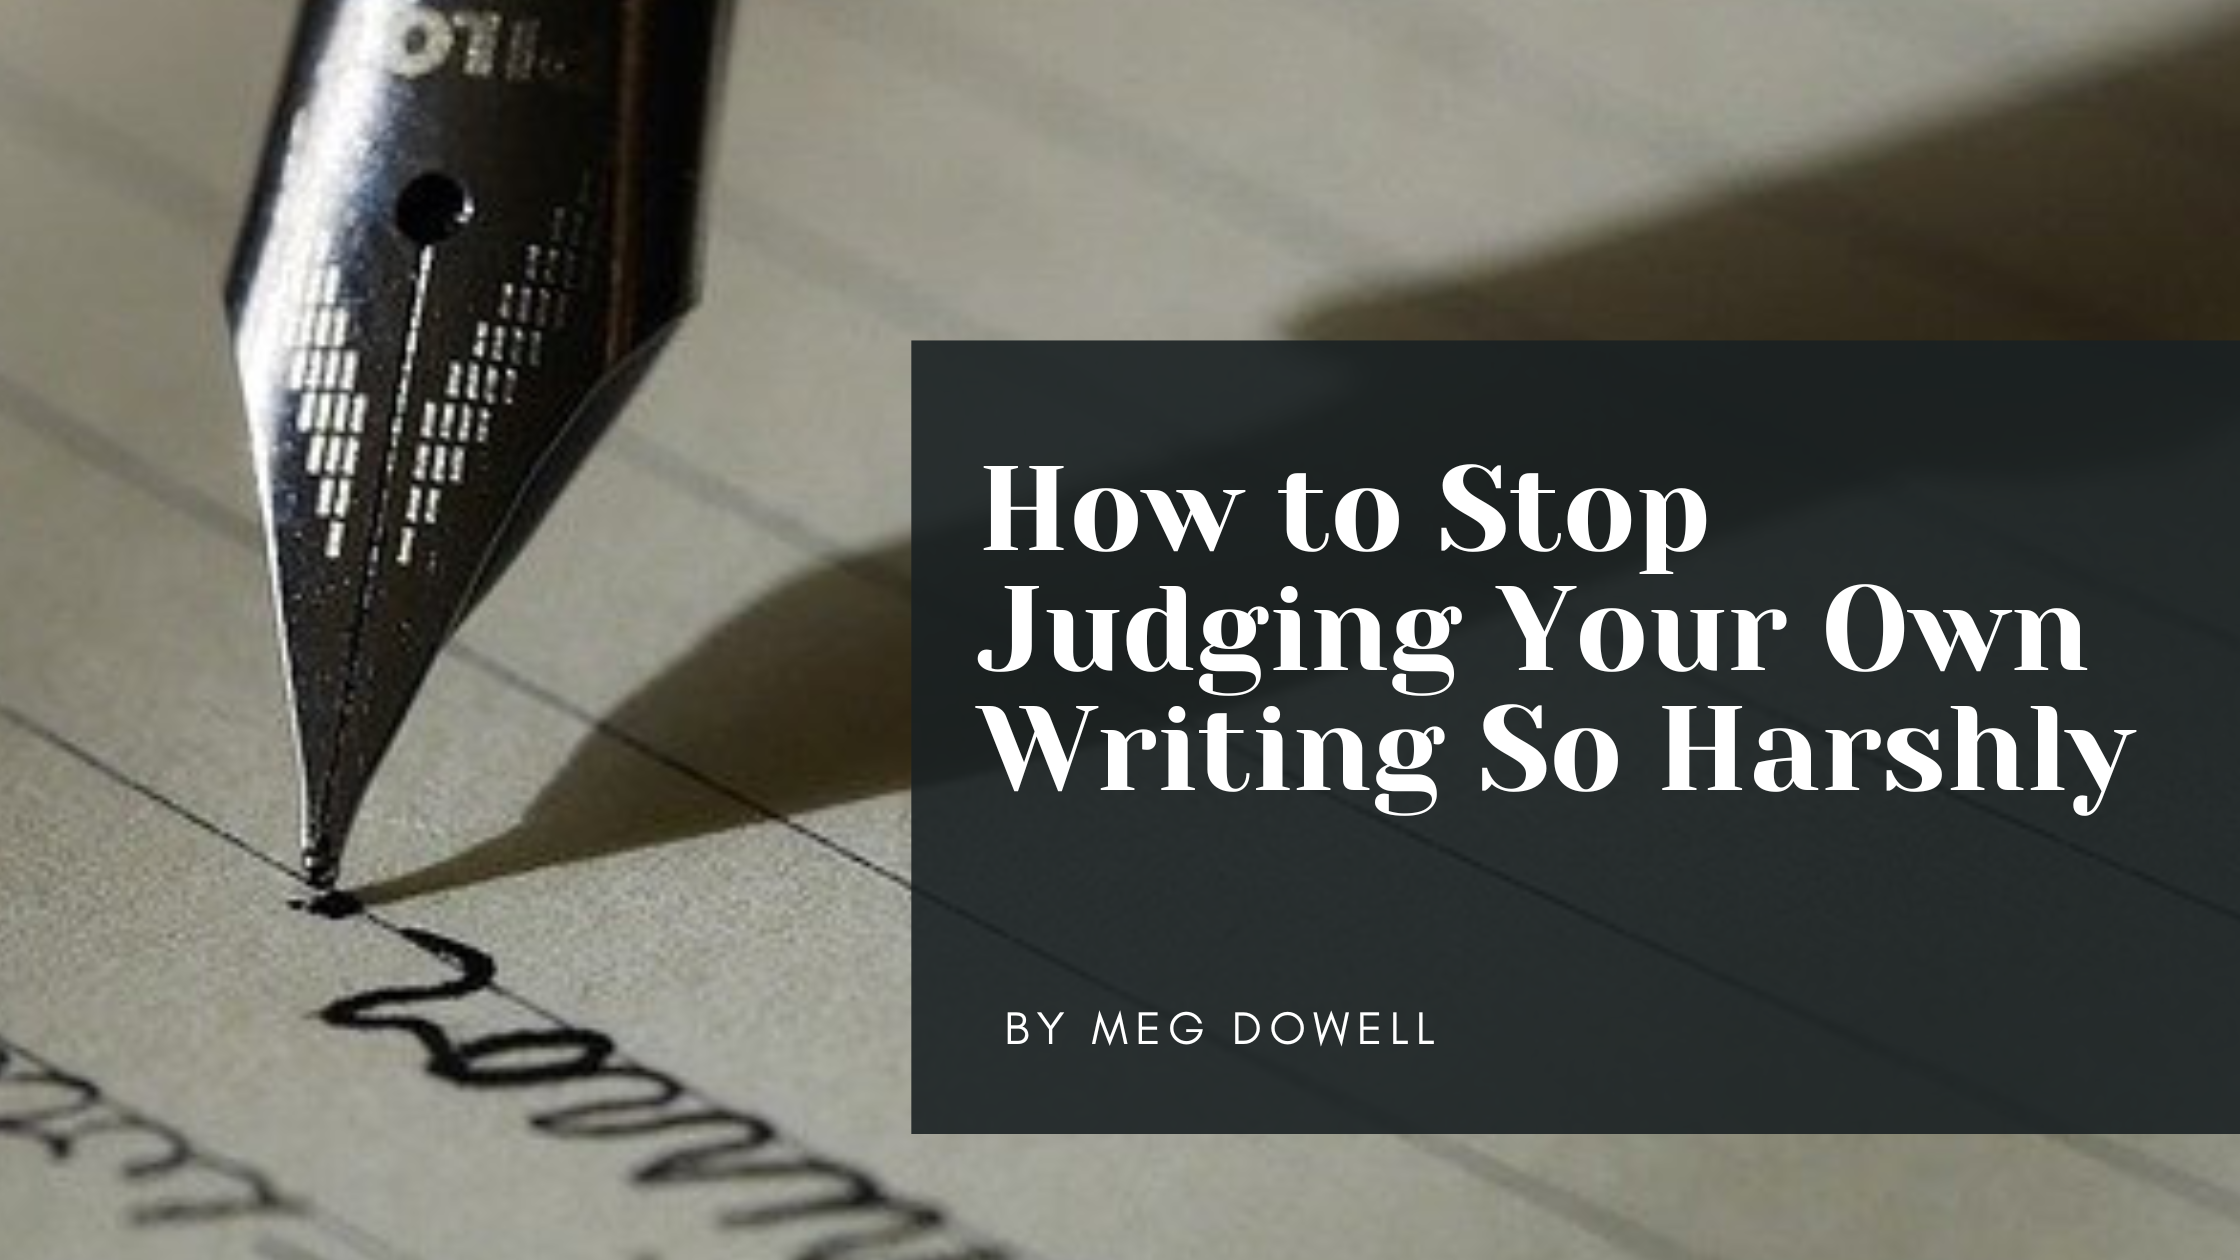 How to Stop Judging Your Own Writing So Harshly